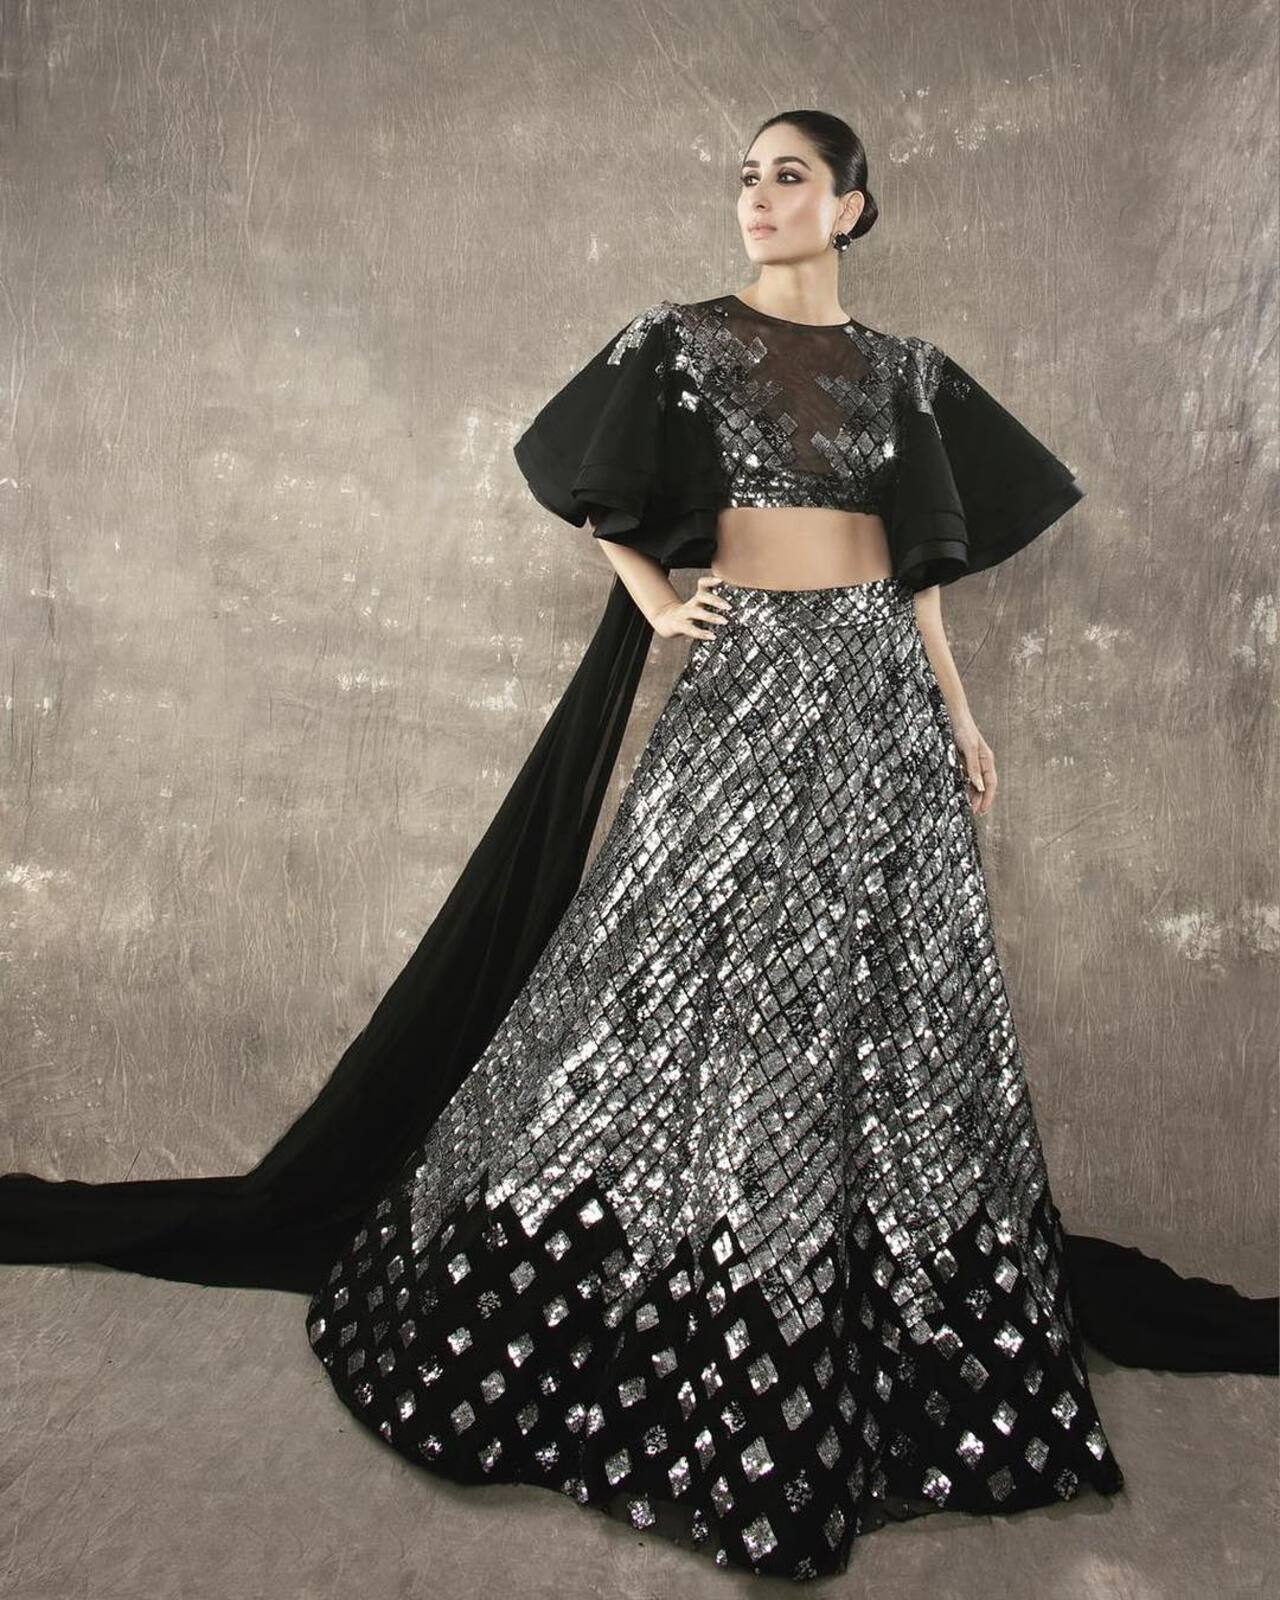 Kareena Kapoor
Kareena looked every bit the diva she is in this classy silver-black lehenga with high-necklined blouse. The silver-foil word, ruffled blouse and long train made this look even more eye-catching